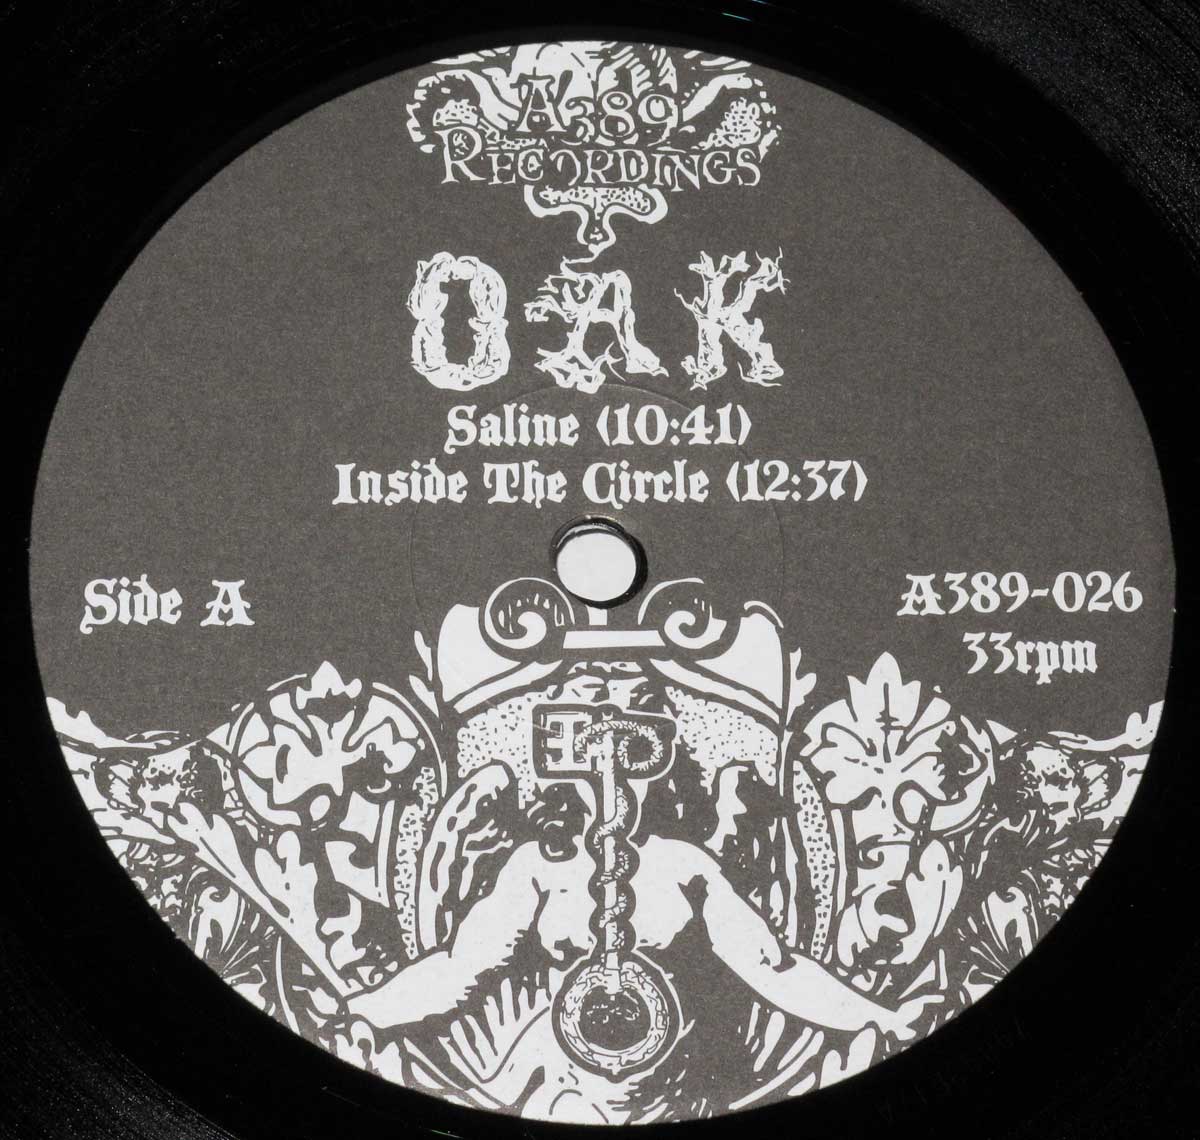 Large Hires Close-up Photo of "Oak" Record Label  